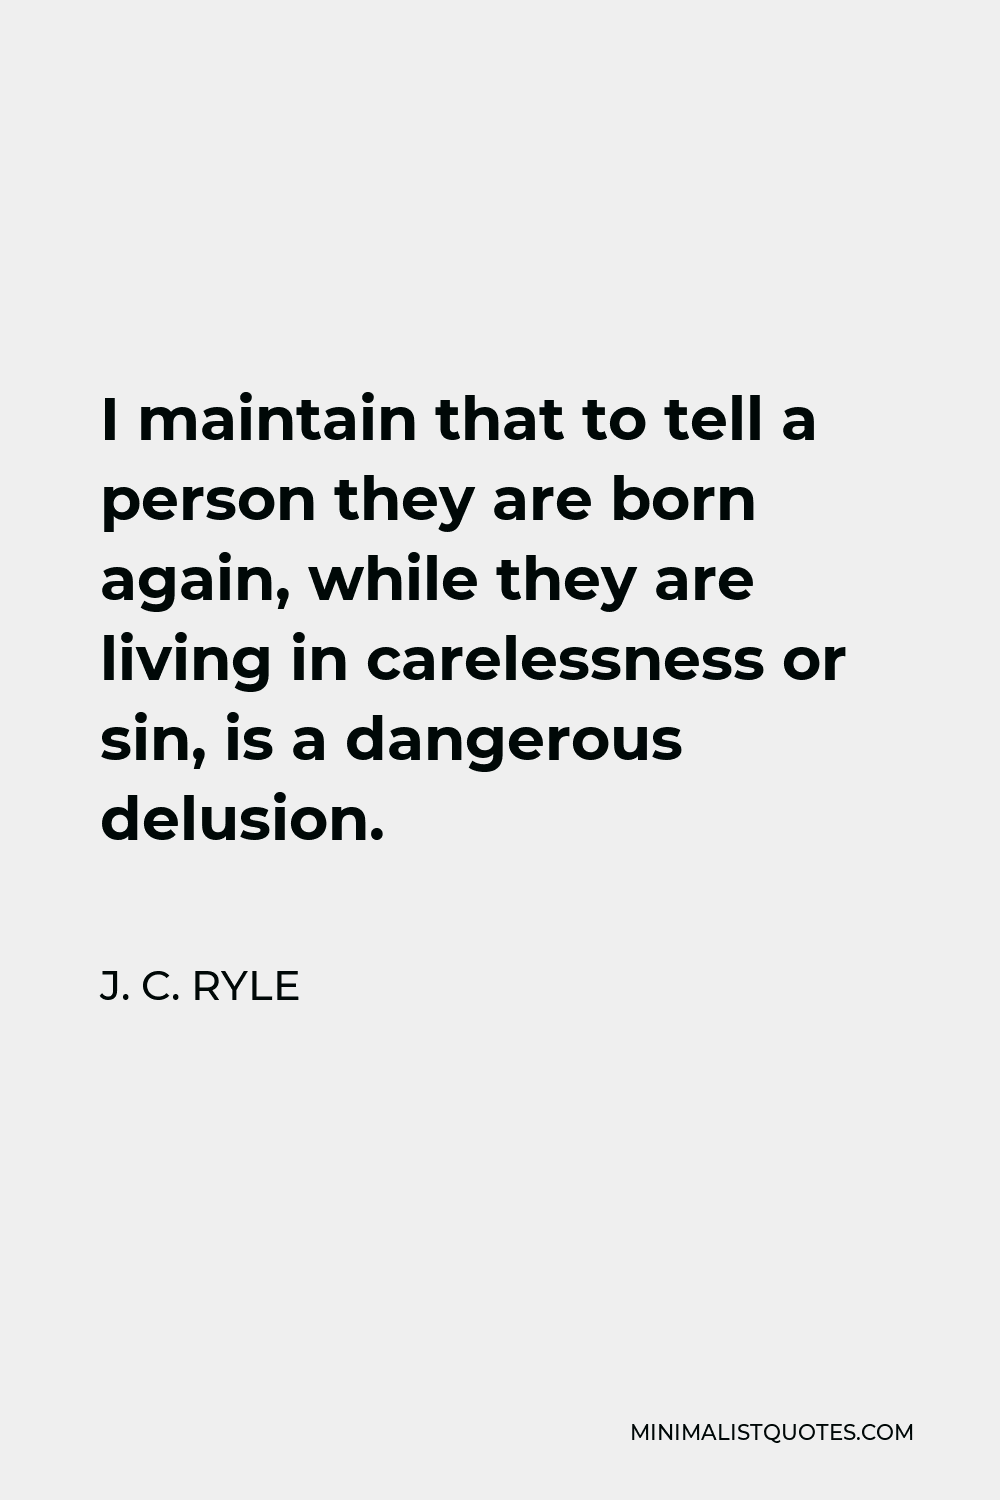 J. C. Ryle Quote - I maintain that to tell a person they are born again, while they are living in carelessness or sin, is a dangerous delusion.